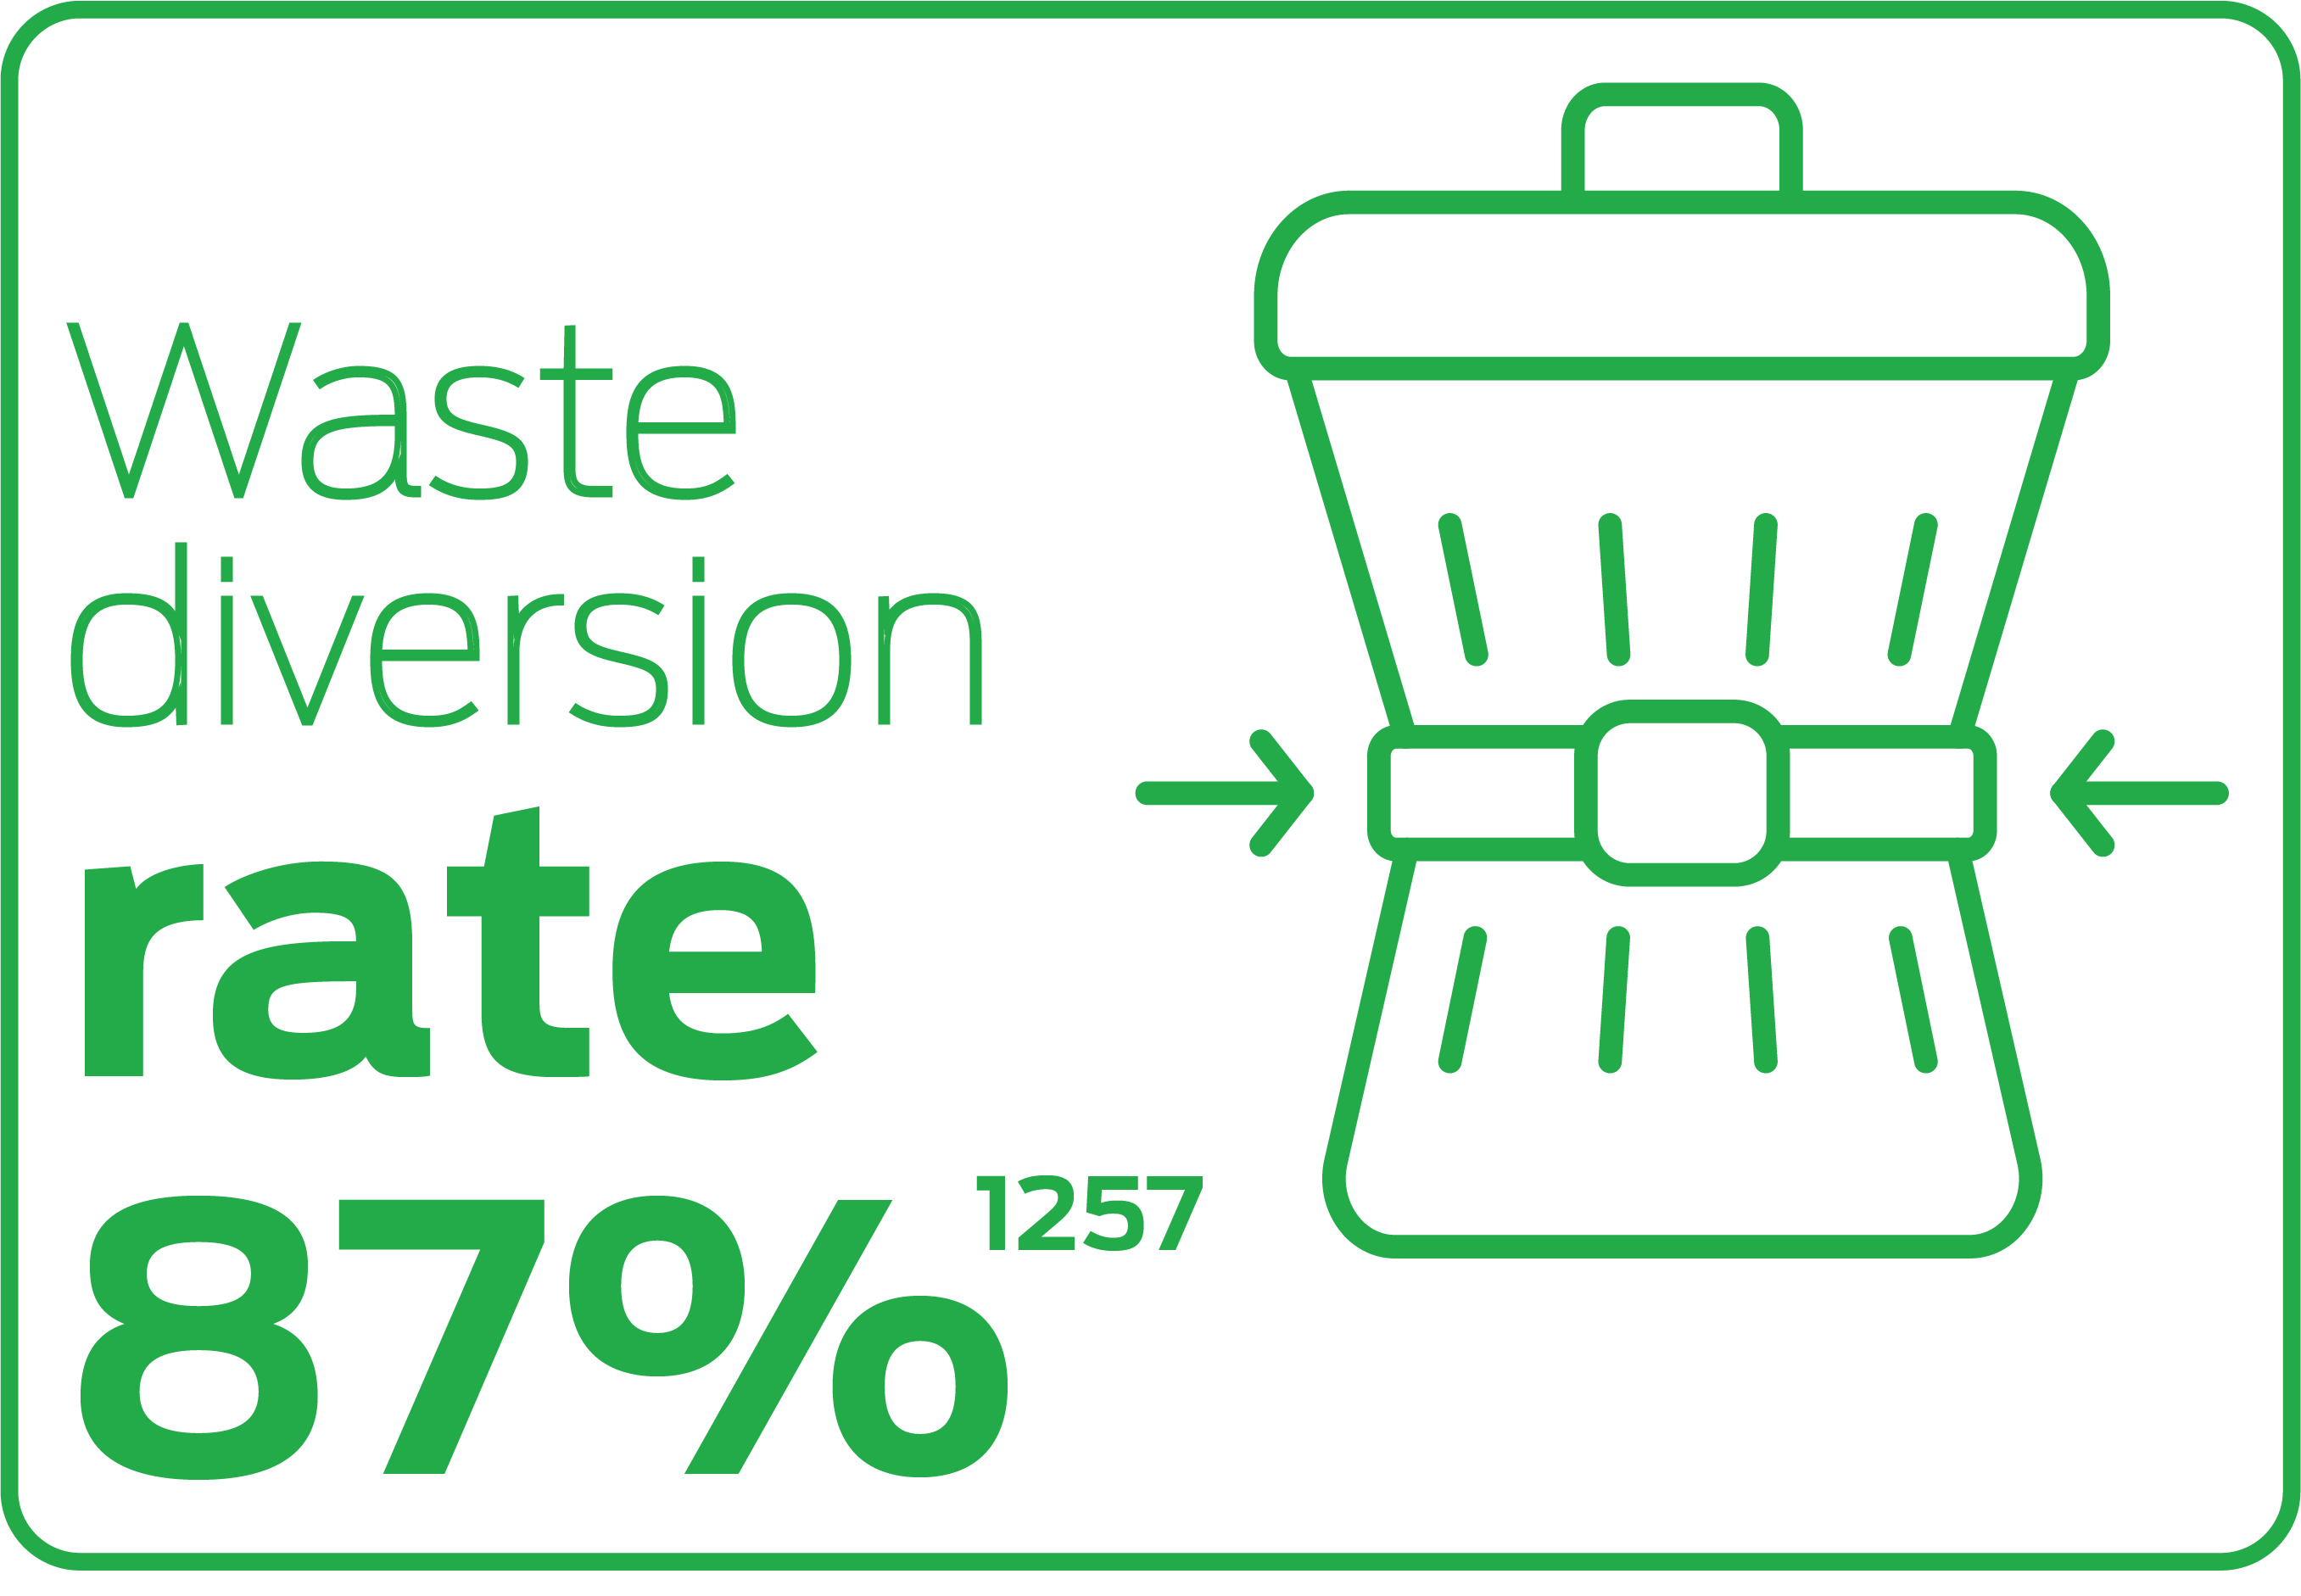 Waste diversion rate 87%